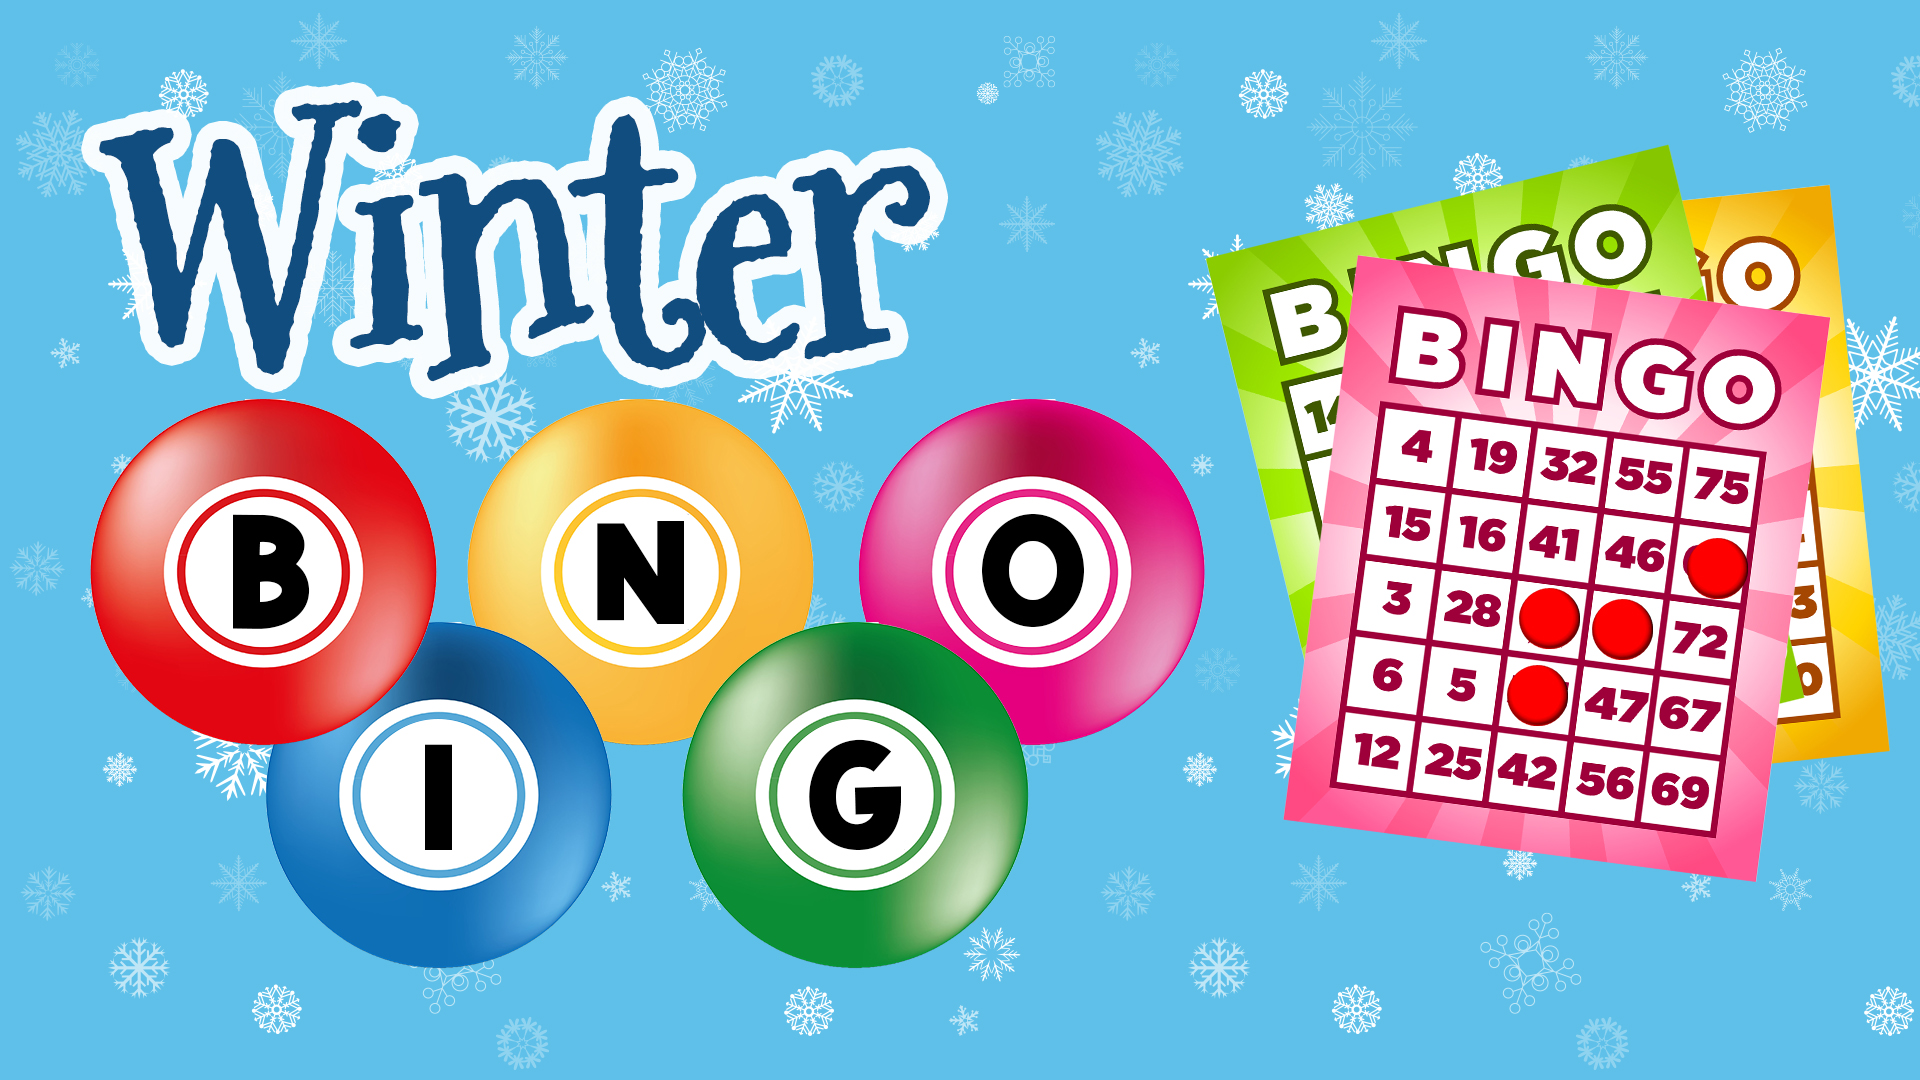 Image reads "Winter Bingo" against a blue snowflake background. Three bingo cards with bingo markers are to the right of the title.